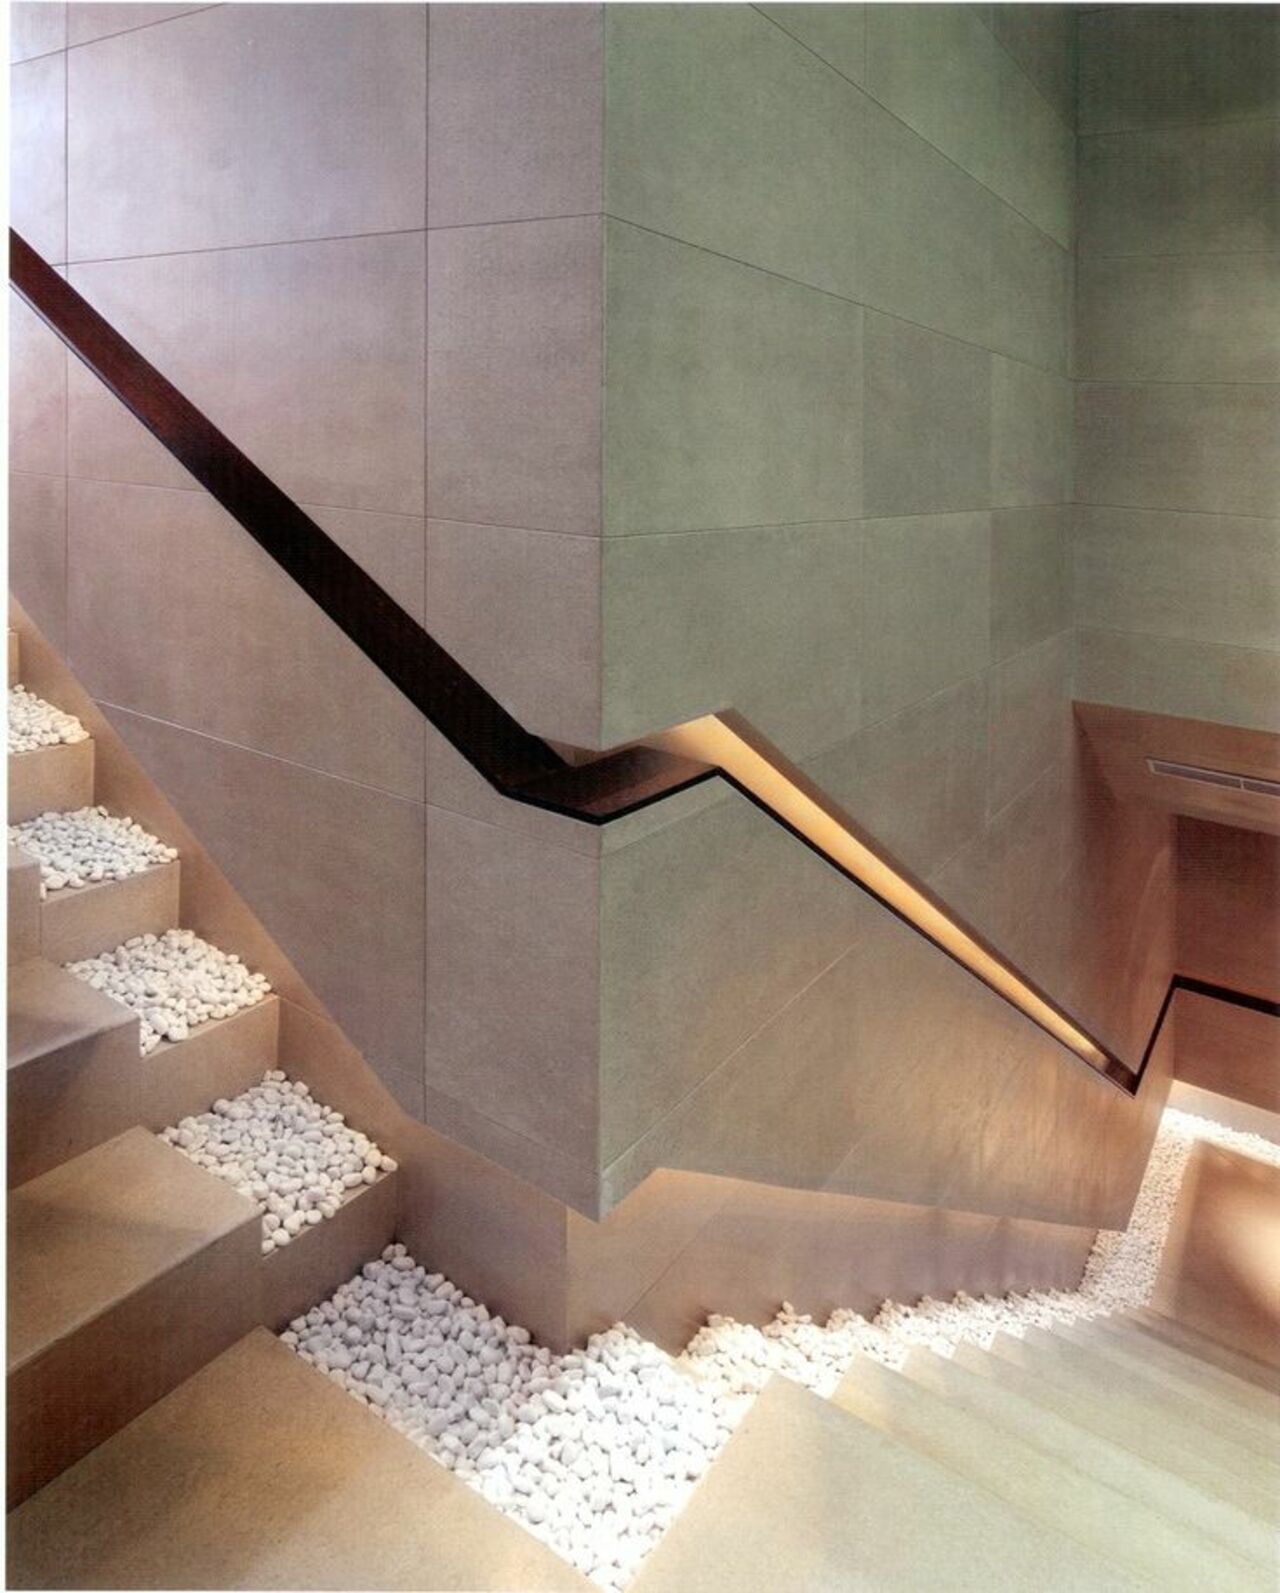 A recessed handrail and white pebbles create an amazing #zen ambiance for this #staircase https://t.co/hJdhX16PfV